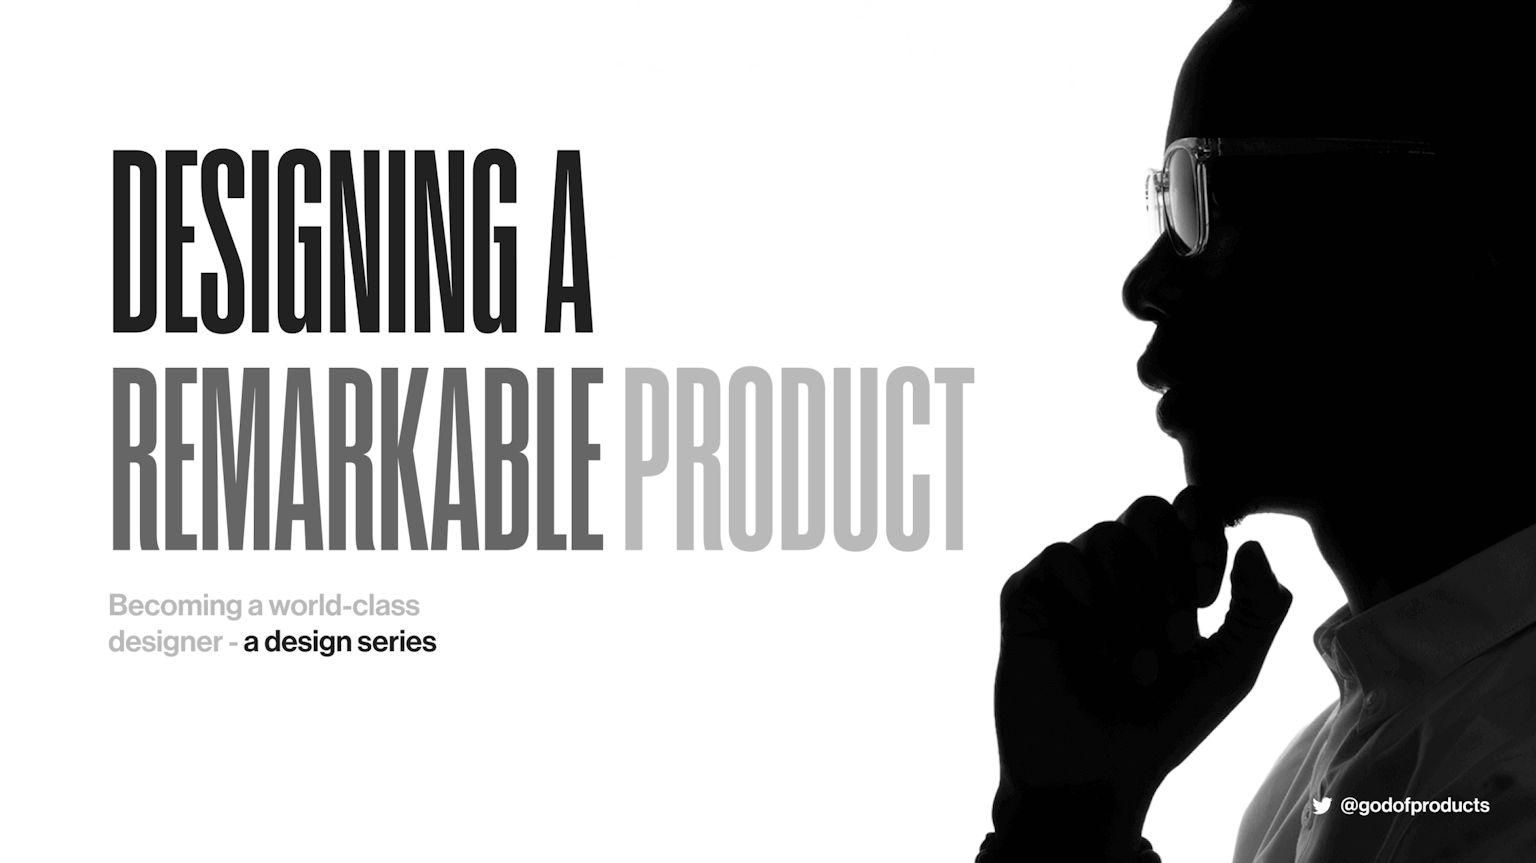 Designing remarkable products - Becoming a world-class designer by Augustine Asiuwhu